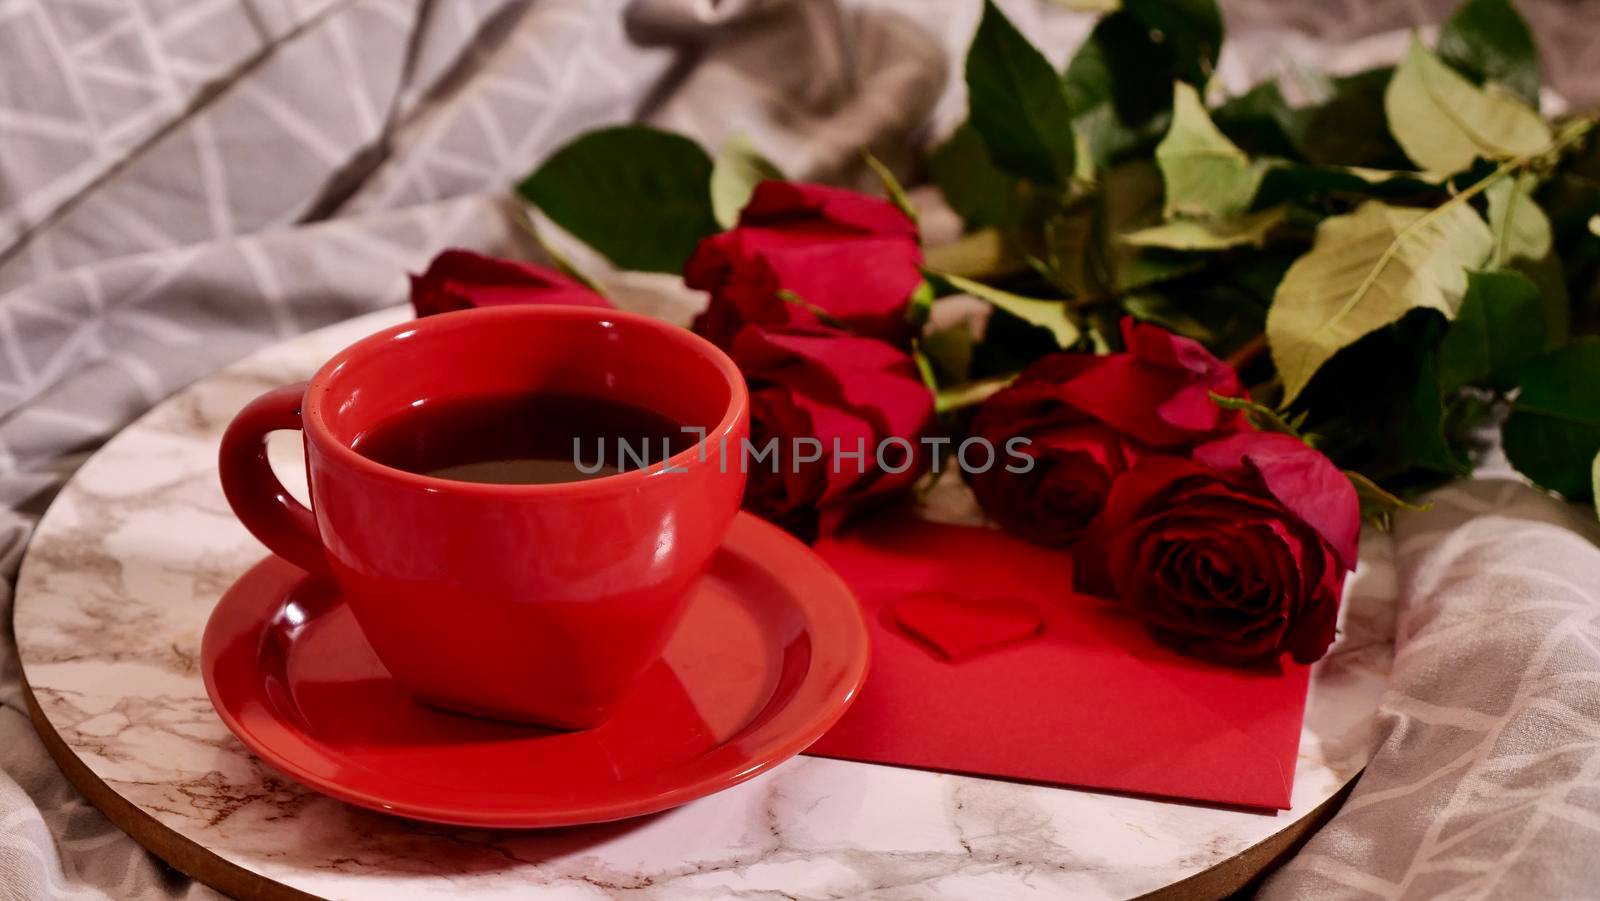 Background Festive Flatlay, composition for Valentine's Day on February 14. Coffee in a red cup, red rose flowers and special letter